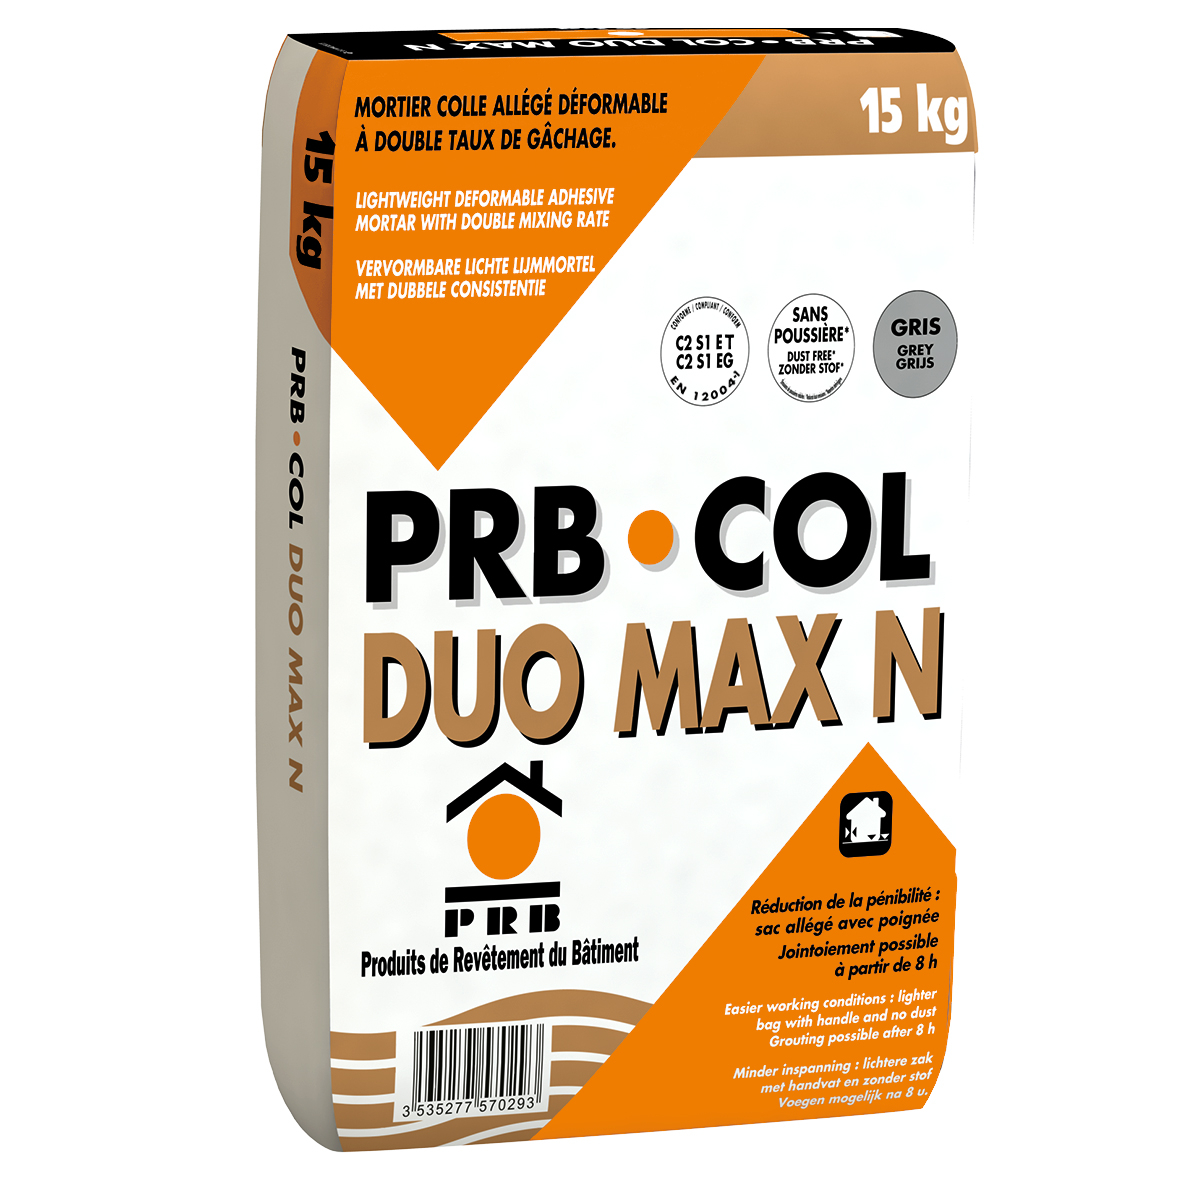 mortier-colle-allege-deformable-col-duo-max-n-gris-15-kg-prb-0